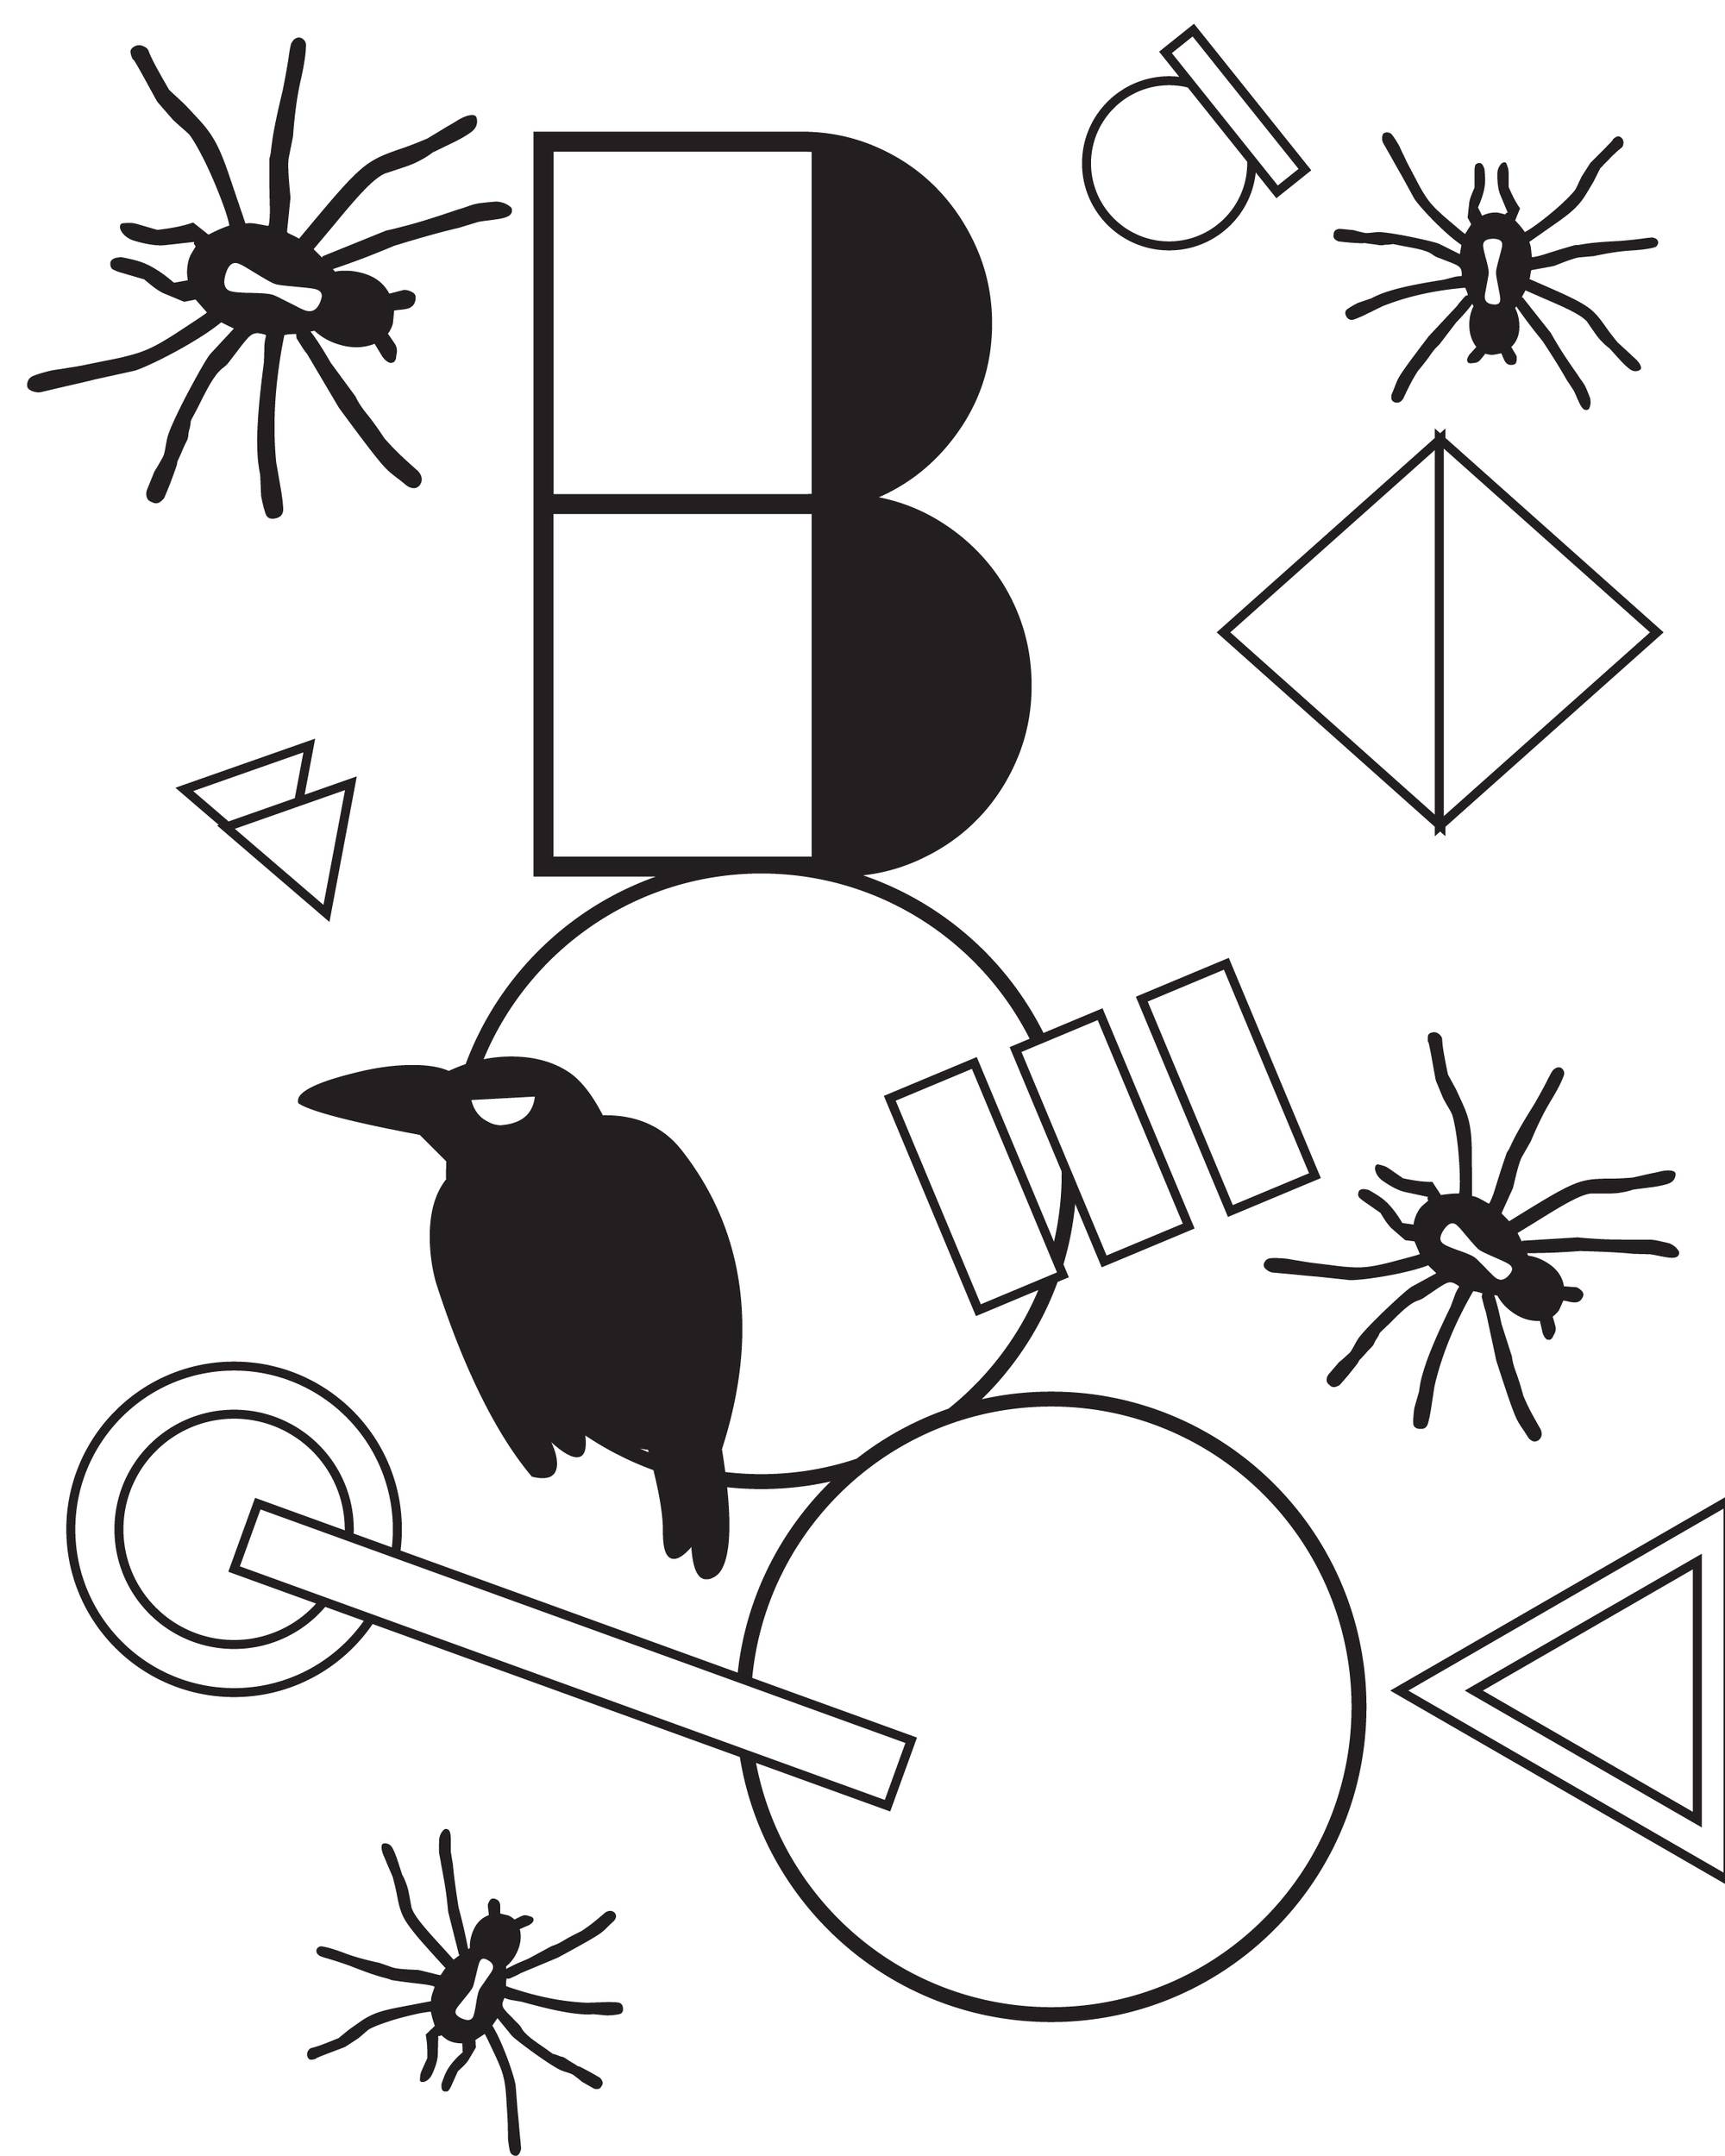 A black and white drawing uses different shapes and has crows and spiders in it.